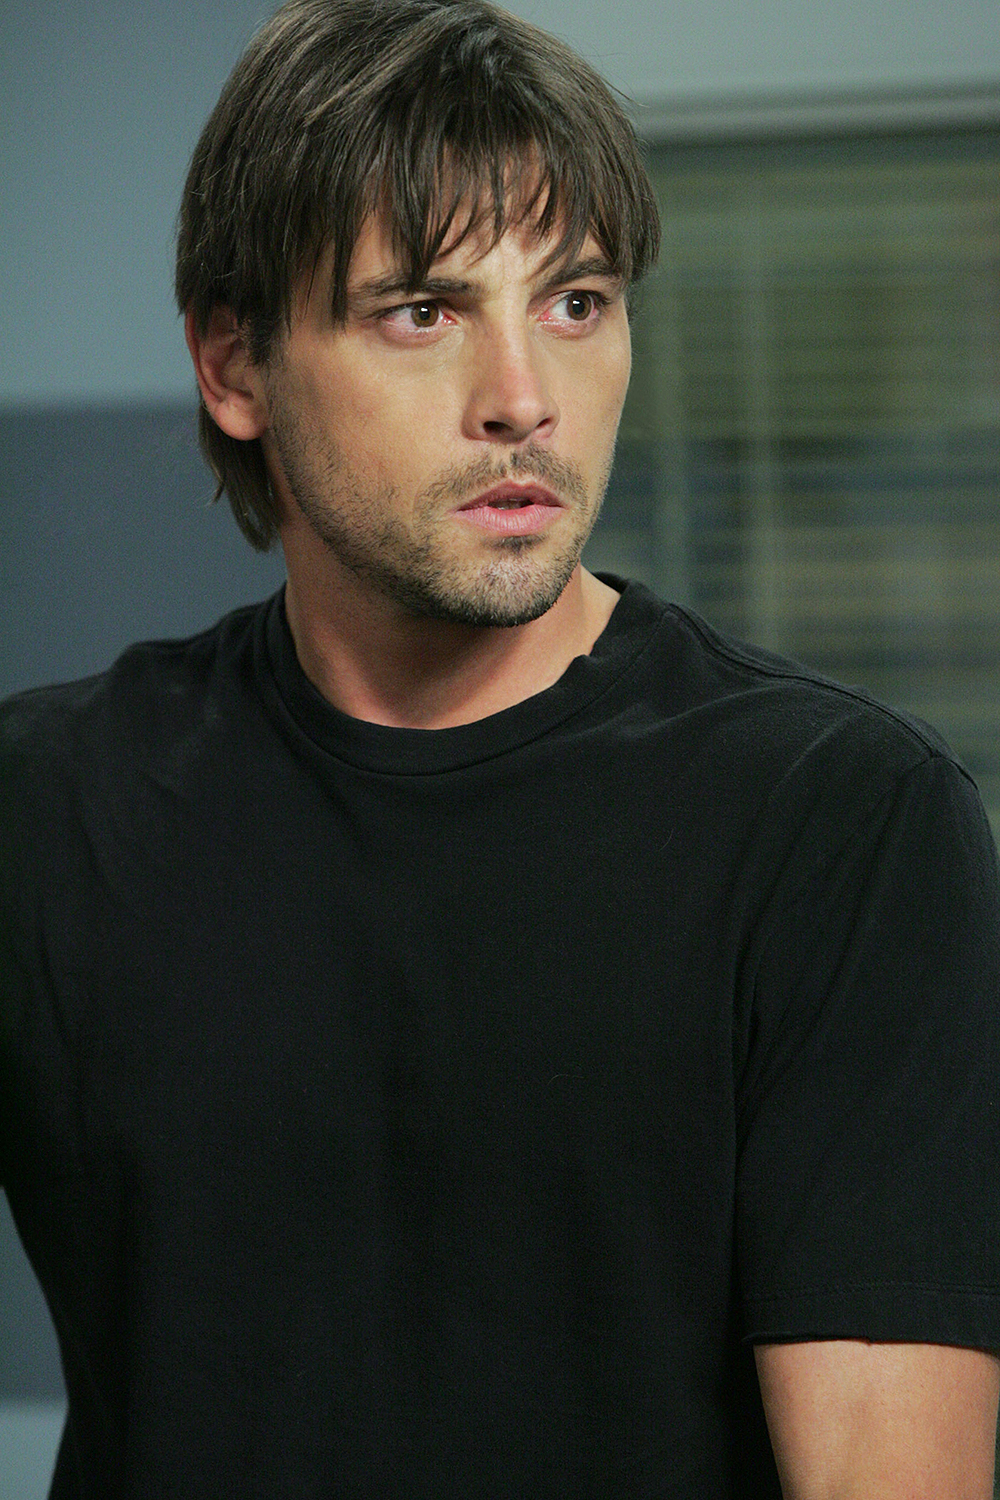 <p>Skeet Ulrich starred in the sci-fi series <em>Jericho. </em>He played Jake Green in the show, which followed the town of Jericho, Kansas in the aftermath of a nuclear attack on 23 major cities in the United States.</p>